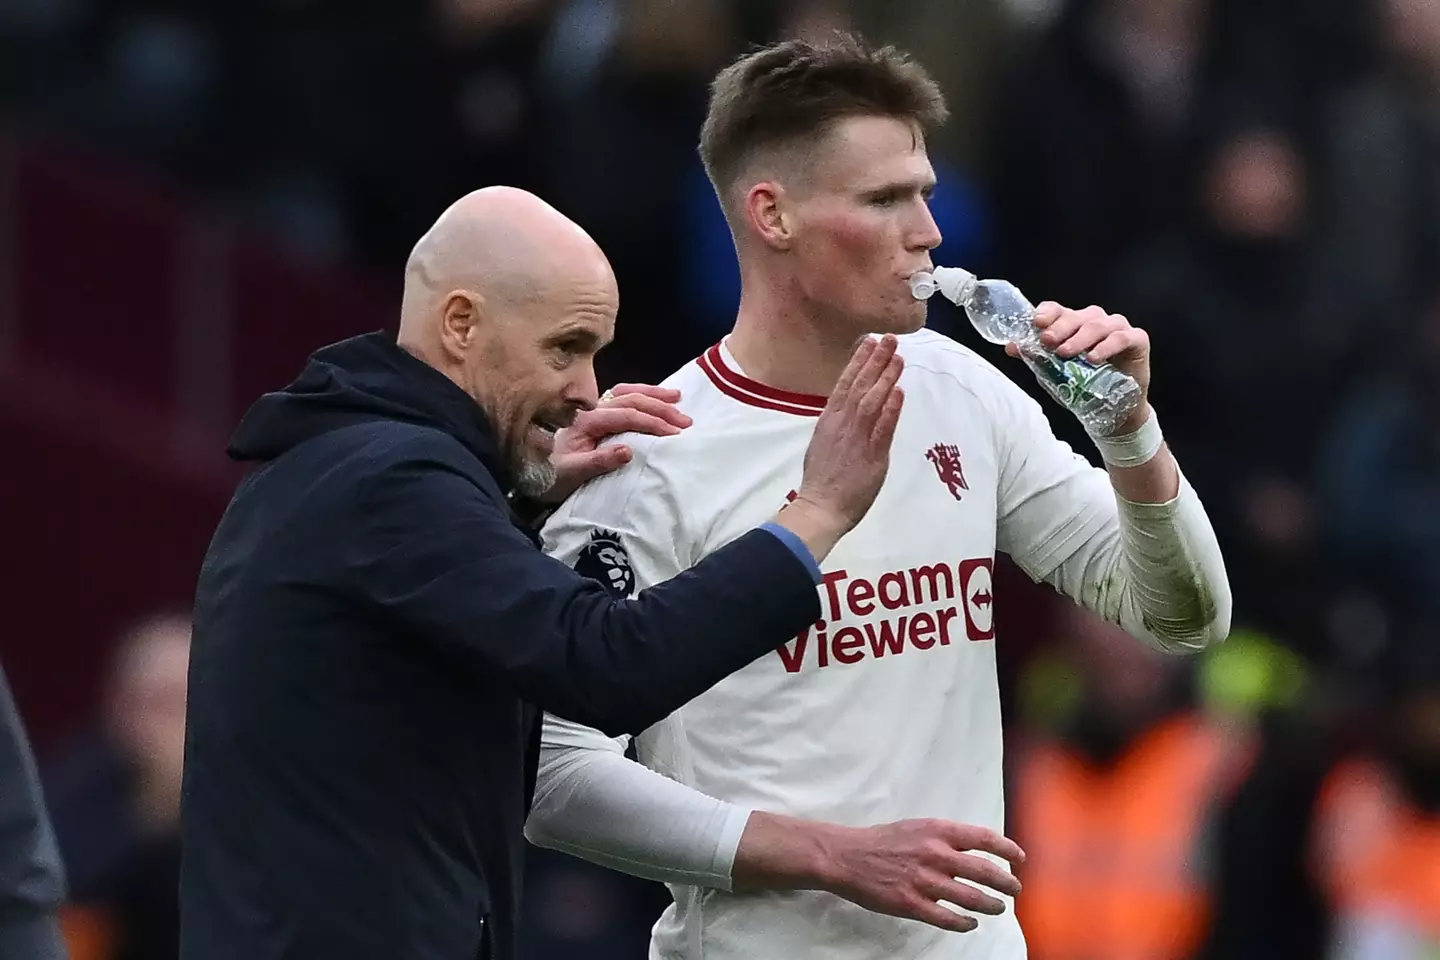 Erik ten Hag gives instructions to Scott McTominay. Image: Getty 